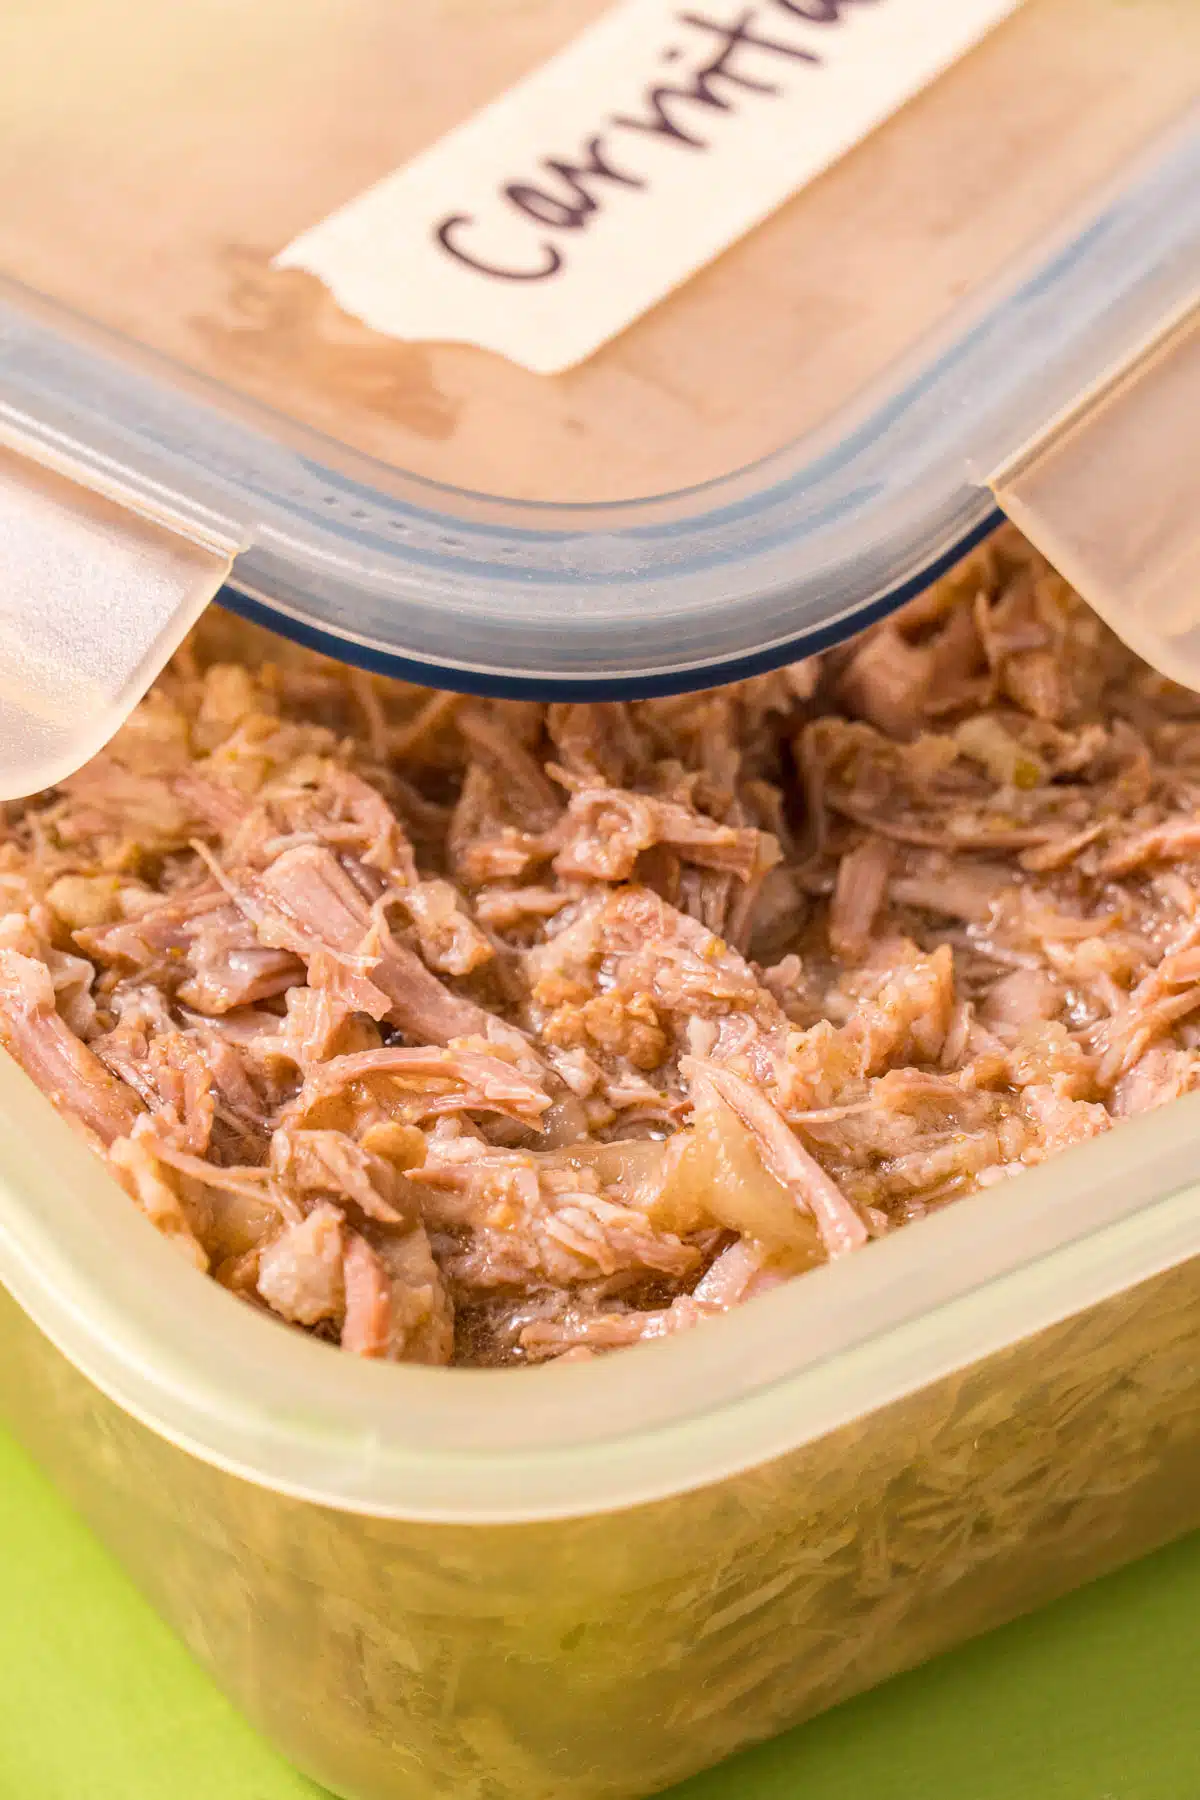 Cooked carnitas in a storage container.